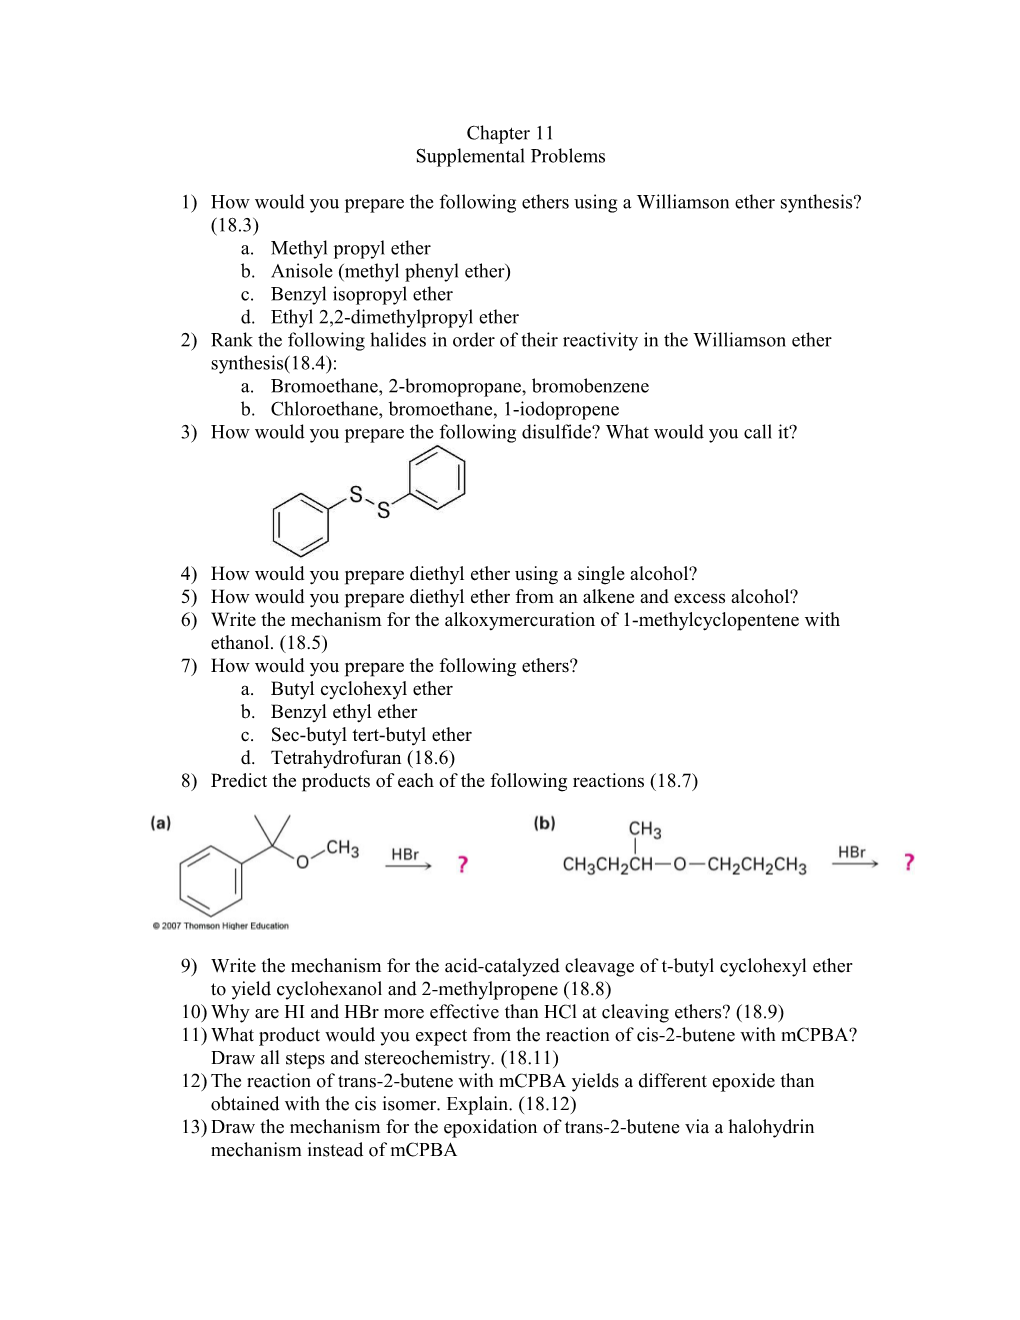 1) How Would You Prepare the Following Ethers Using a Williamson Ether Synthesis?(18.3)